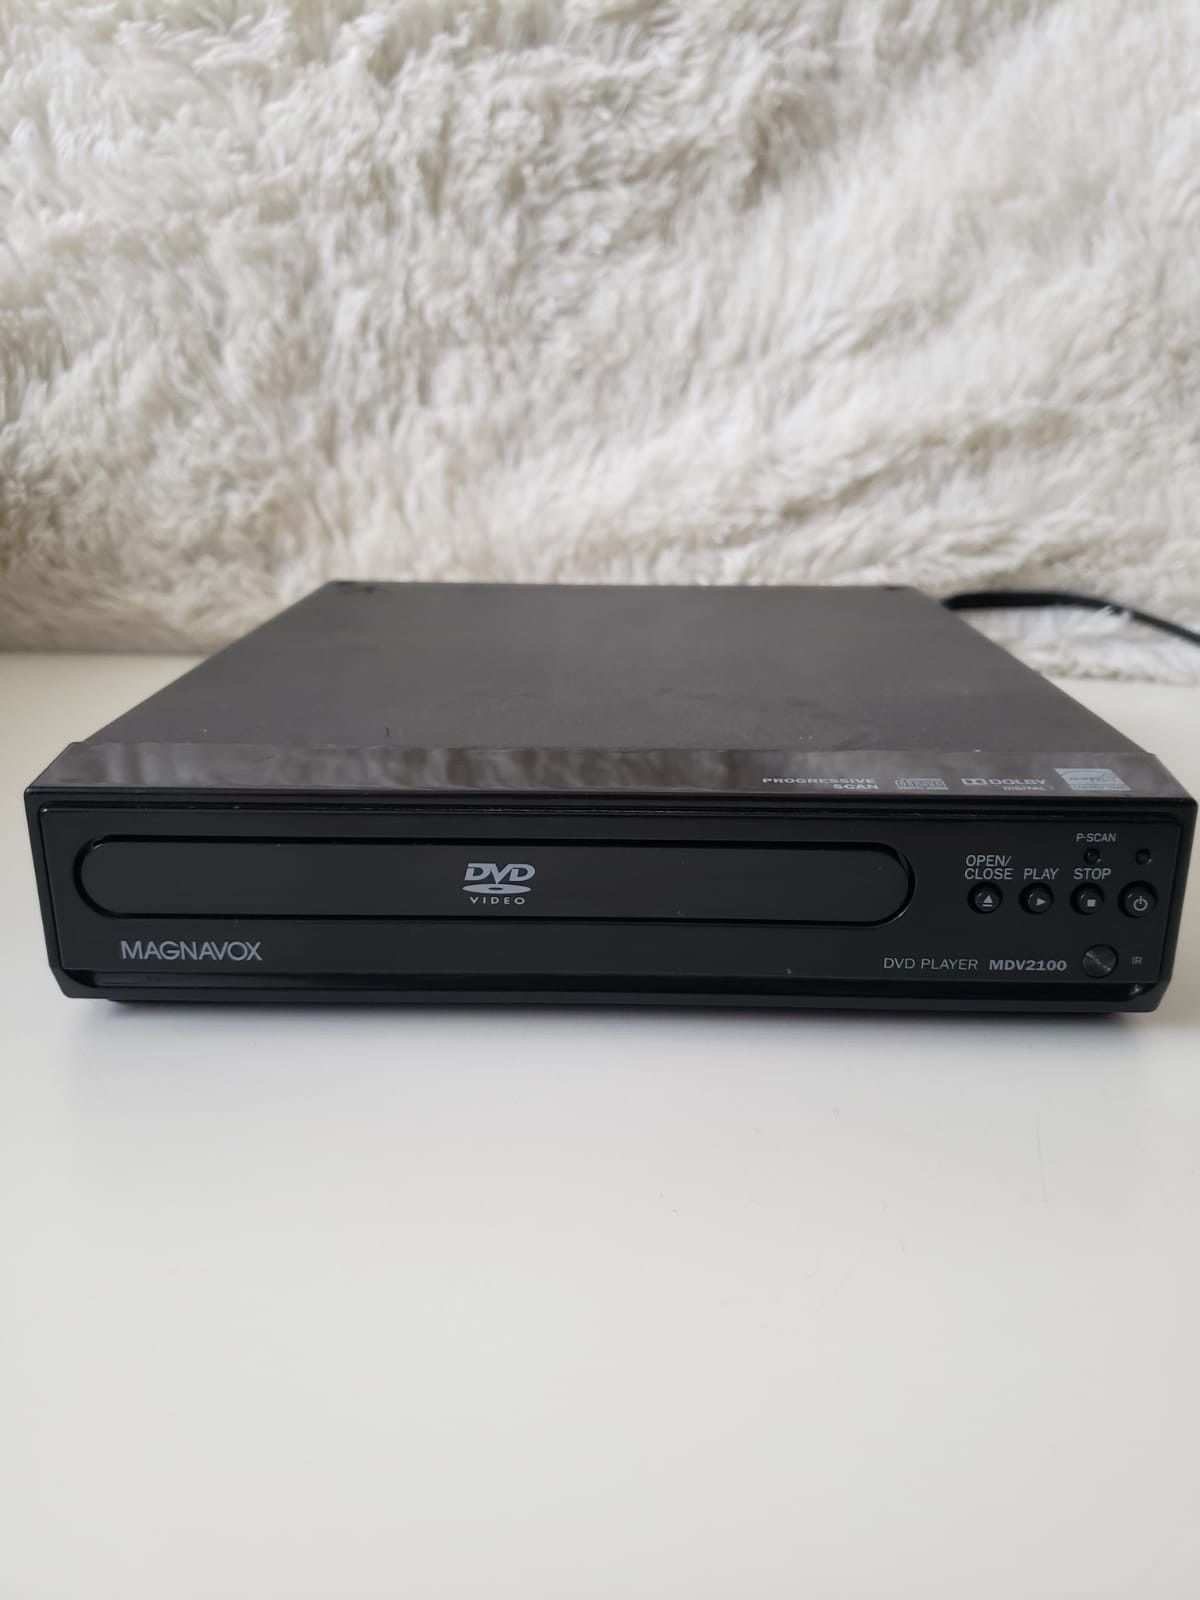 Magnavox MDV2100/F7 DVD Player Compact Model Tested